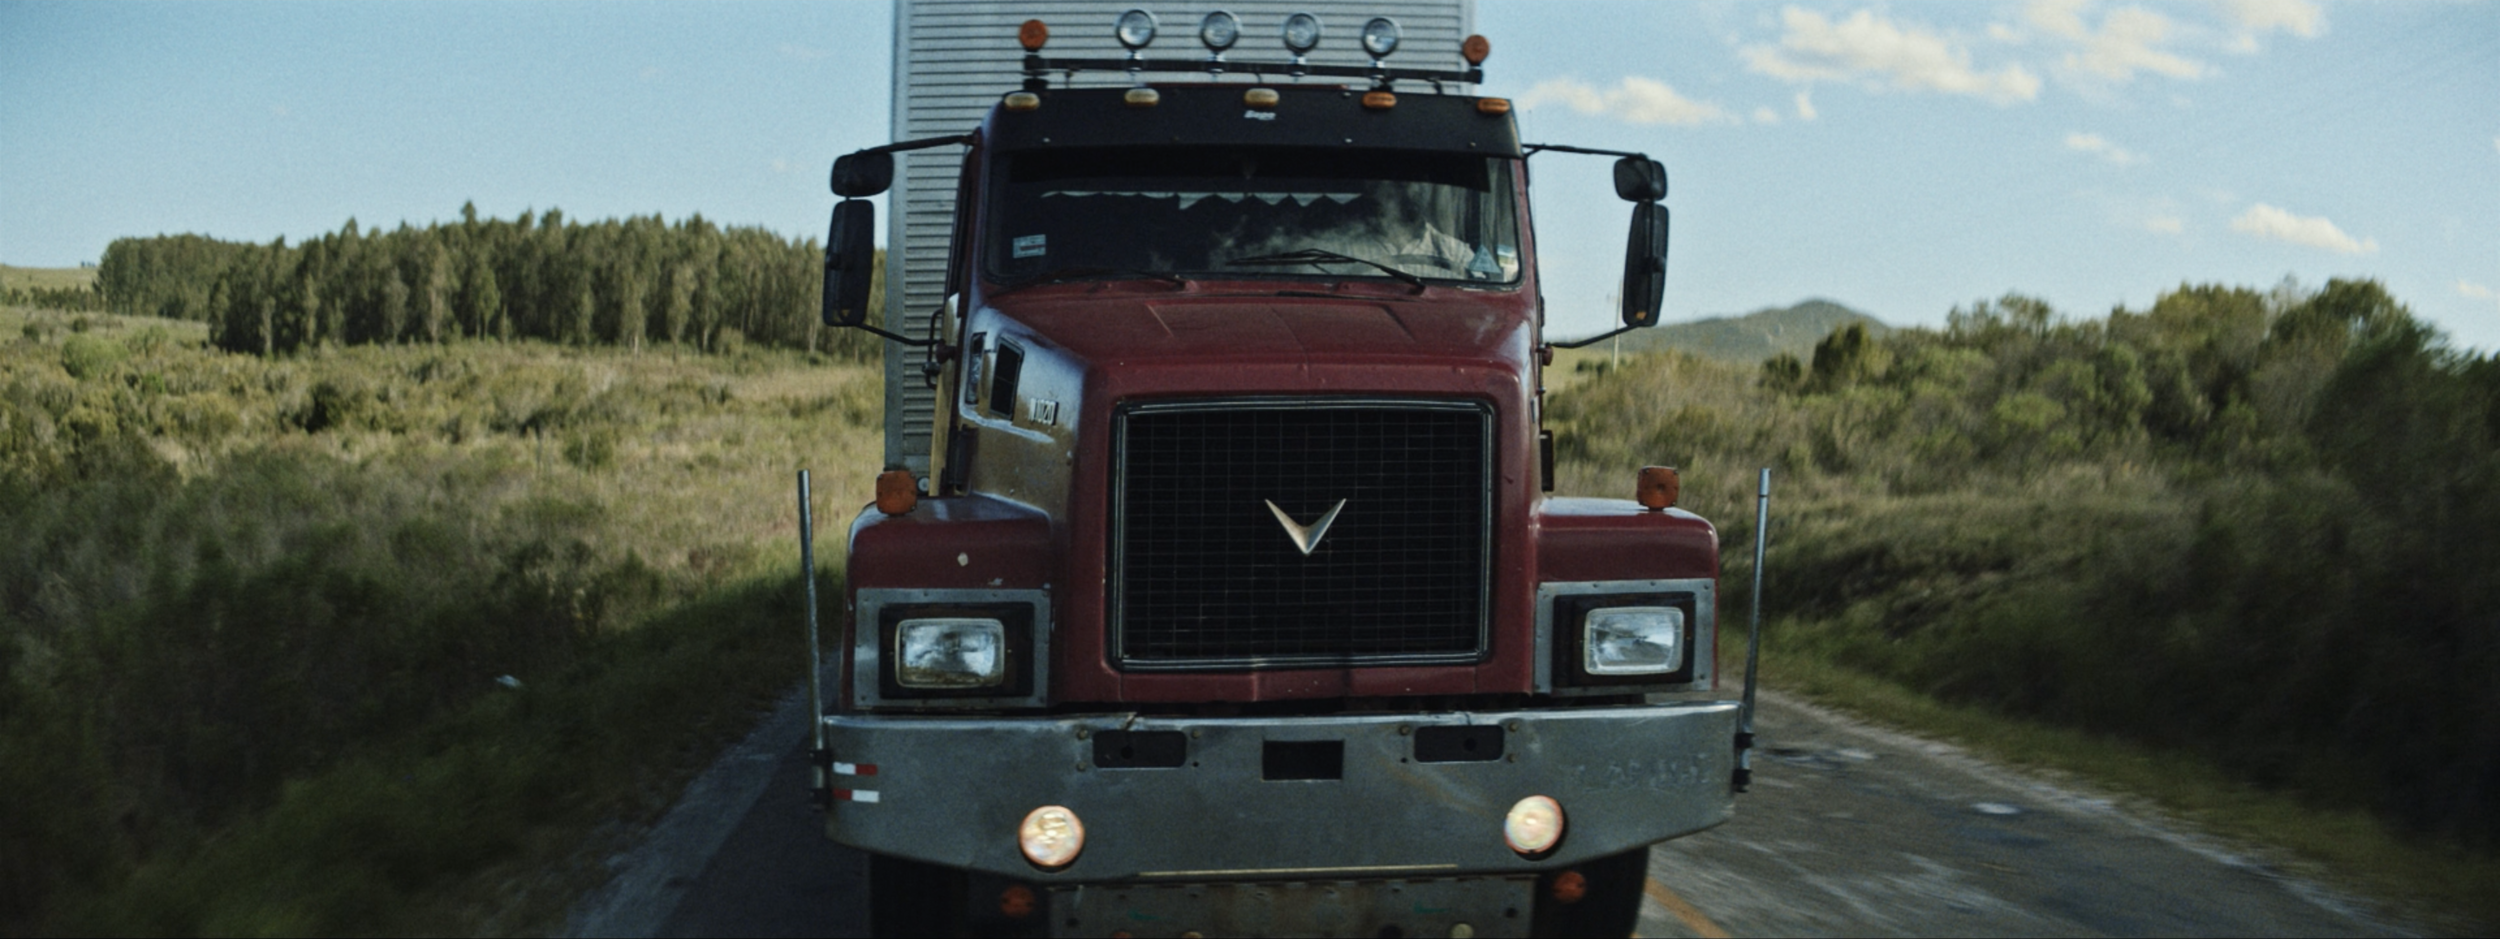 Toughbook: Out there truck spot